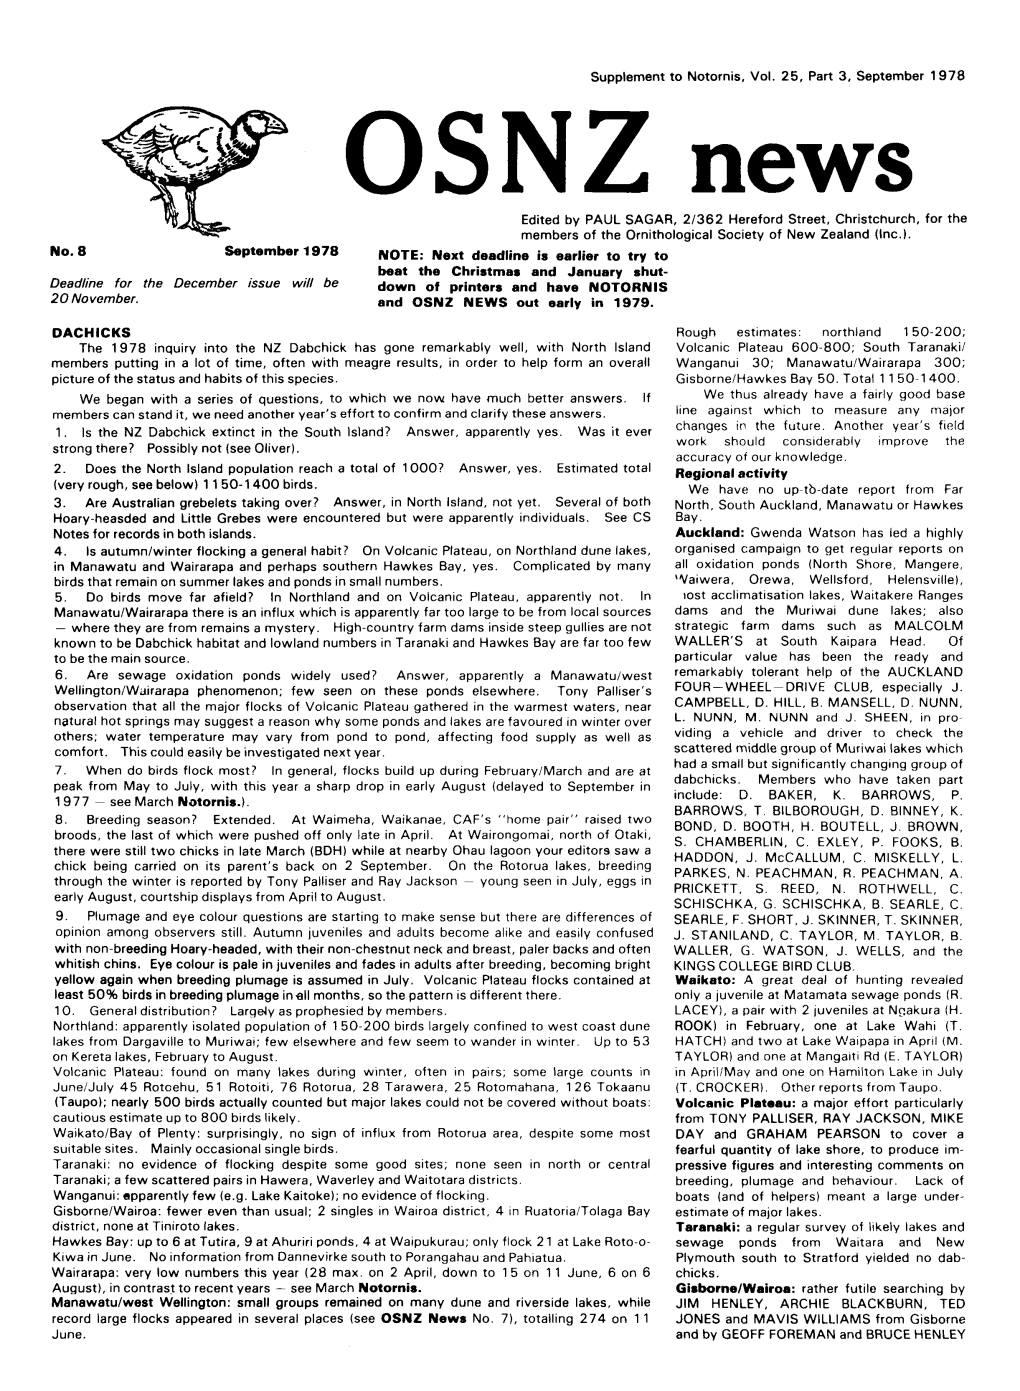 OSNZ News Edited by PAUL SAGAR, 21362 Hereford Street, Christchurch, for the Members of the Ornithological Society of New Zealand (Inc.)